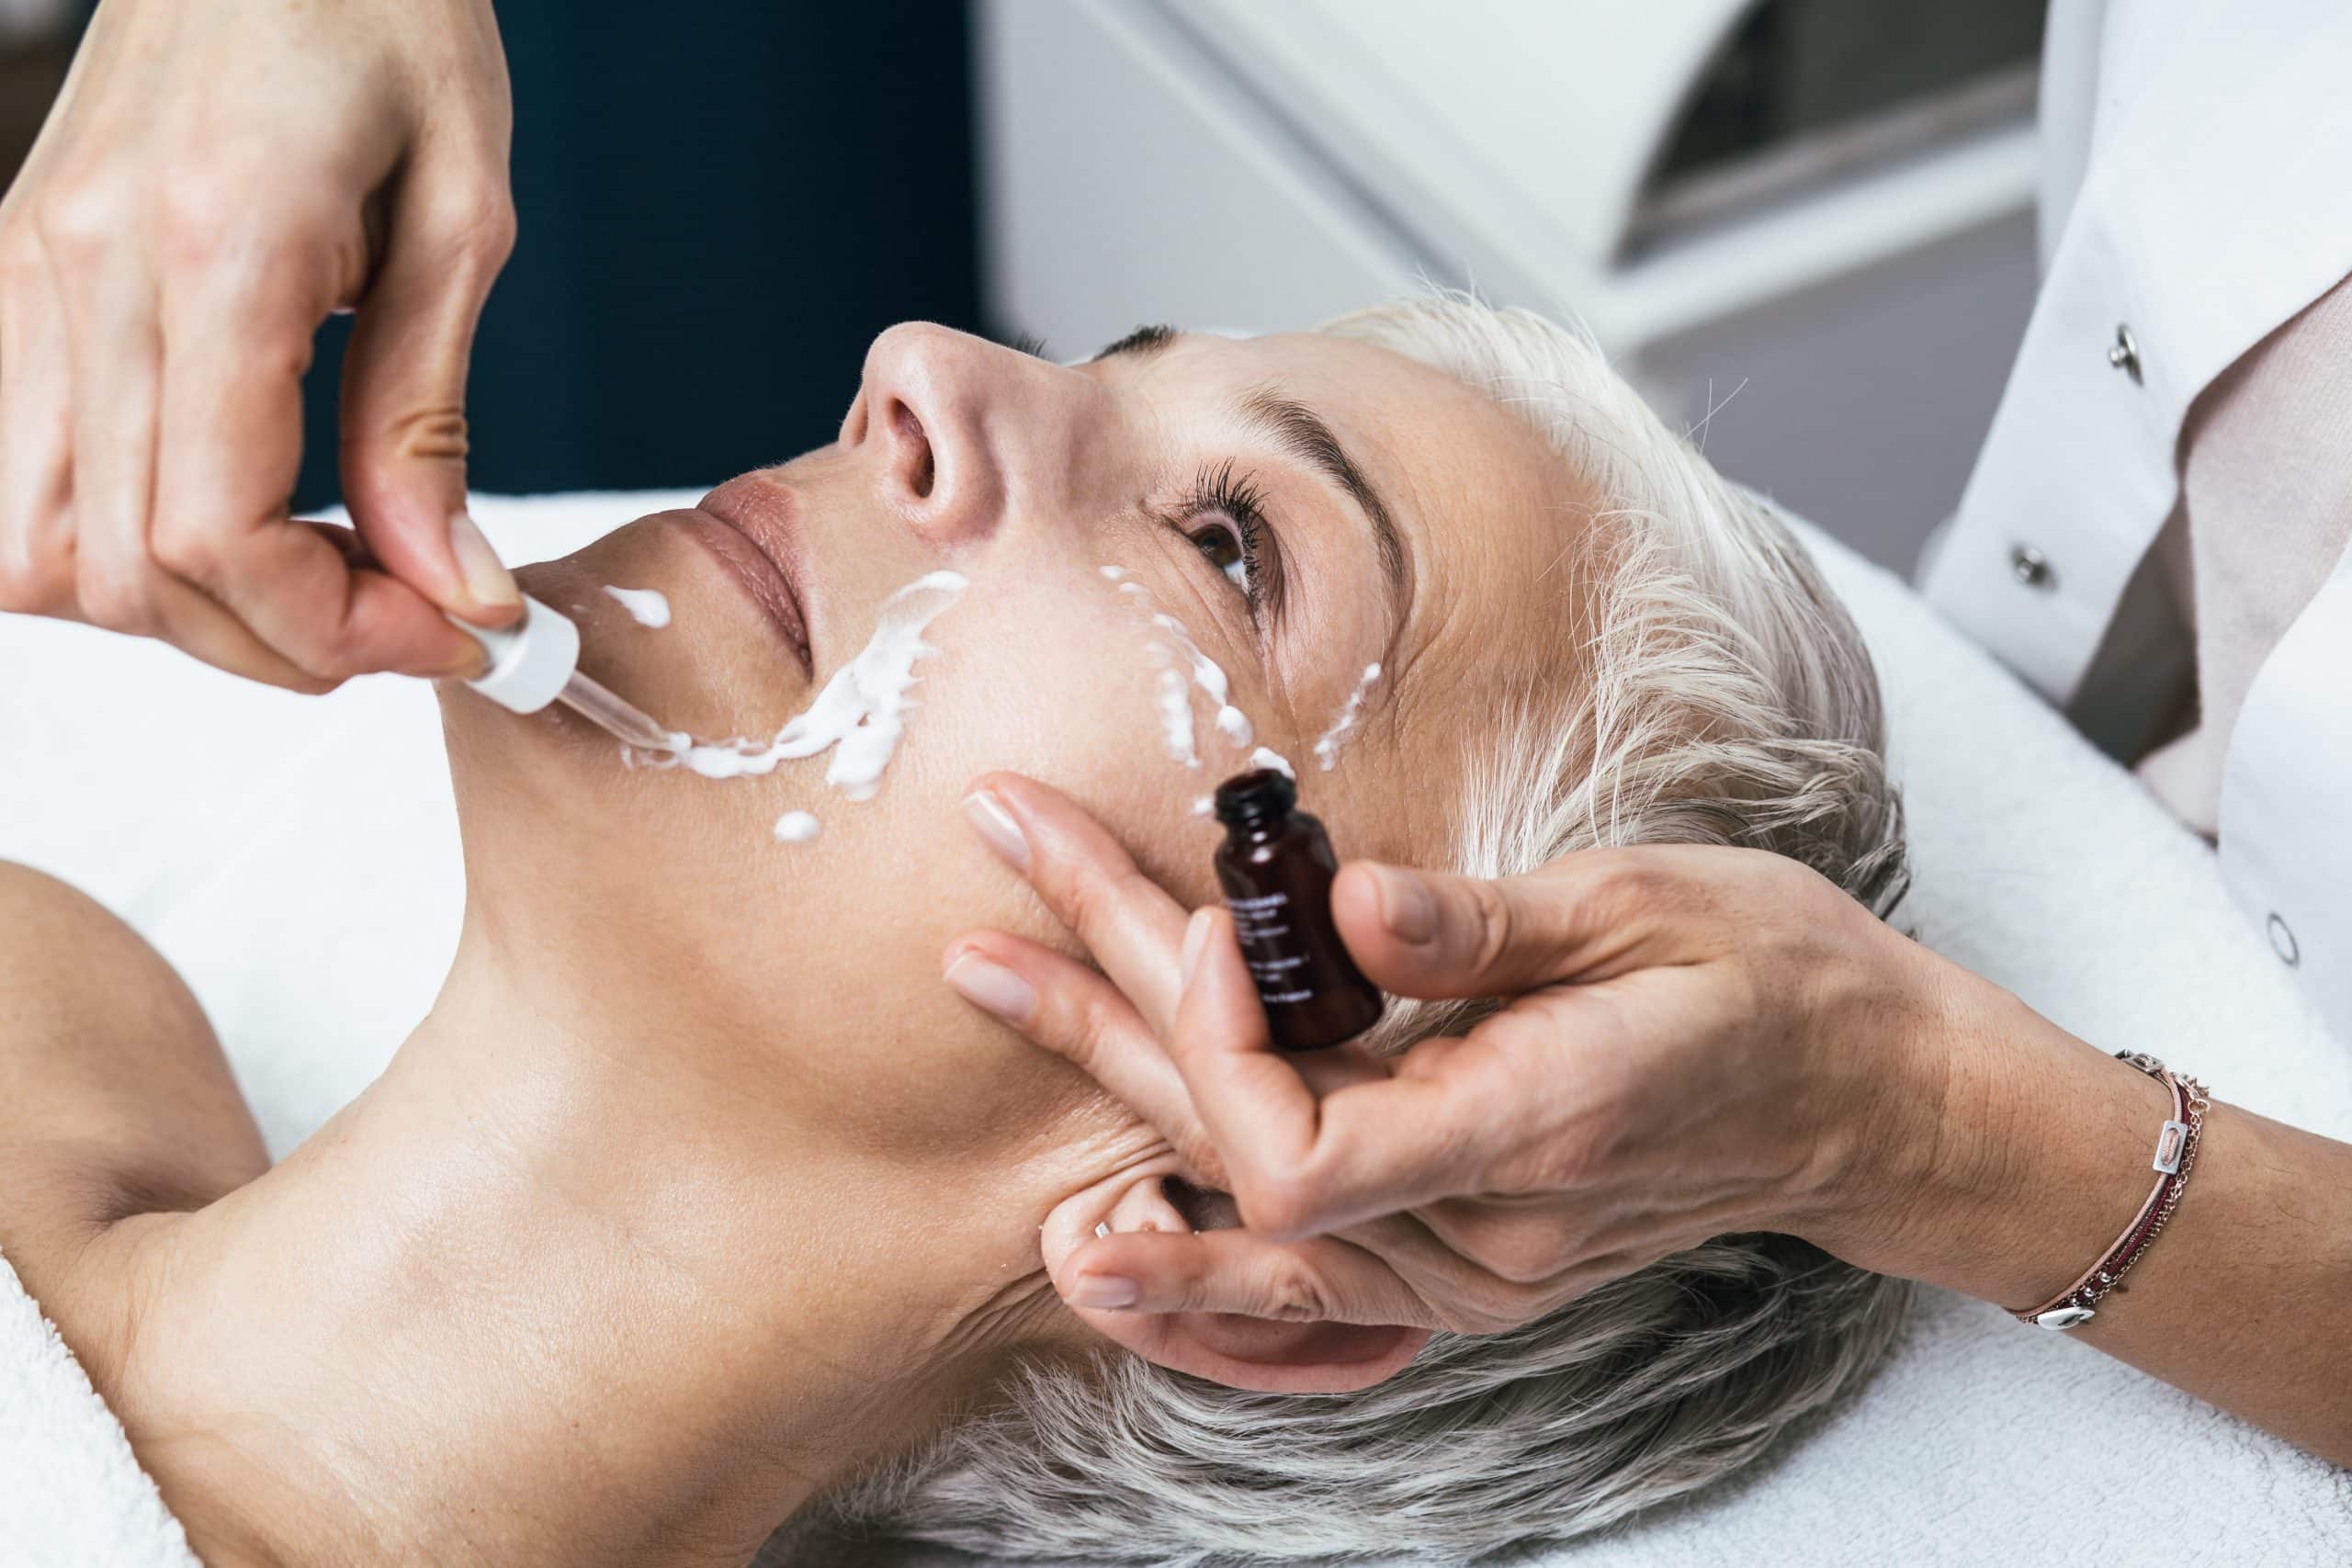 WHAT ARE THE BENEFITS OF A CHEMICAL PEEL